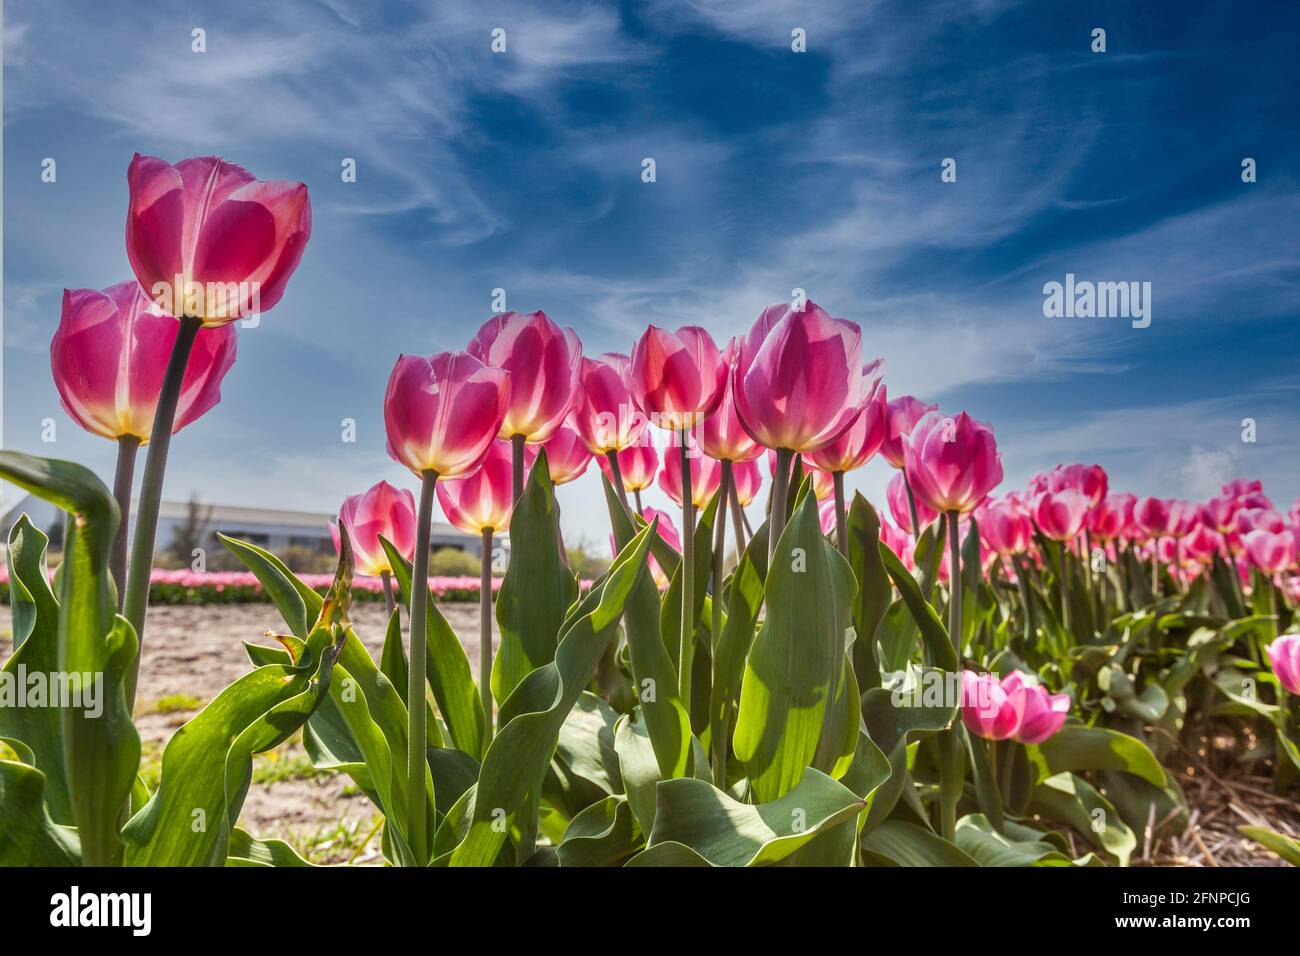 Close up rose blooming tulips in a field against background blue sky with veil clouds Stock Photo